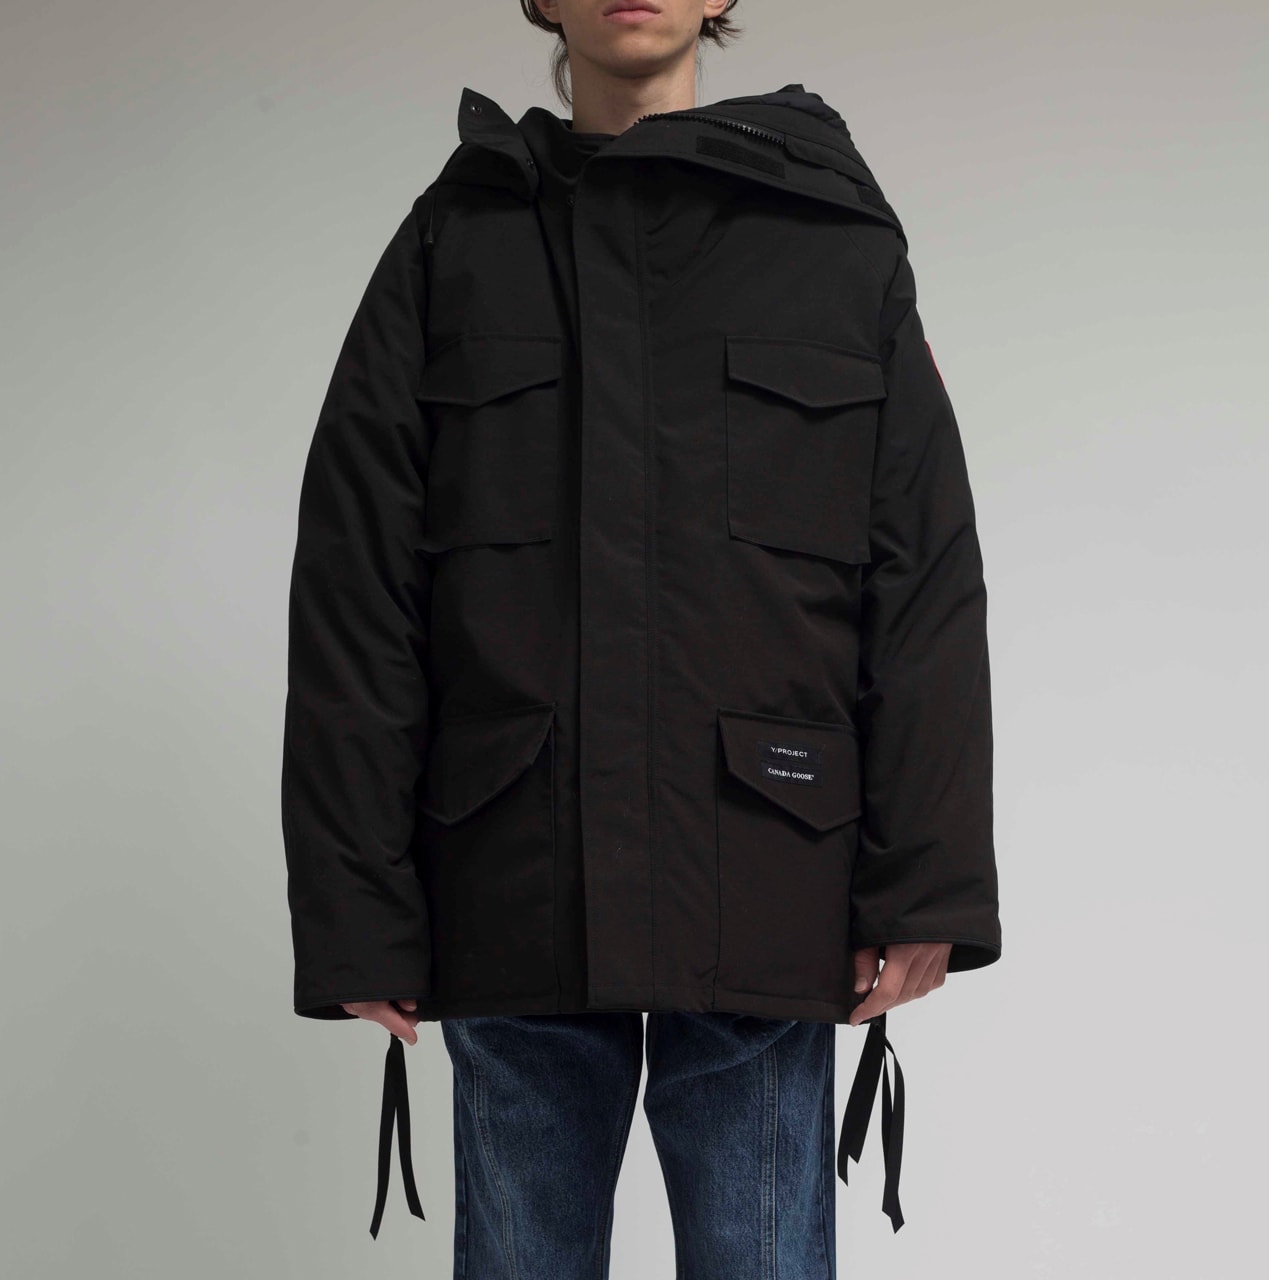 Y/Project x Canada Goose FW20 Collaboration Collection fall winter 2020